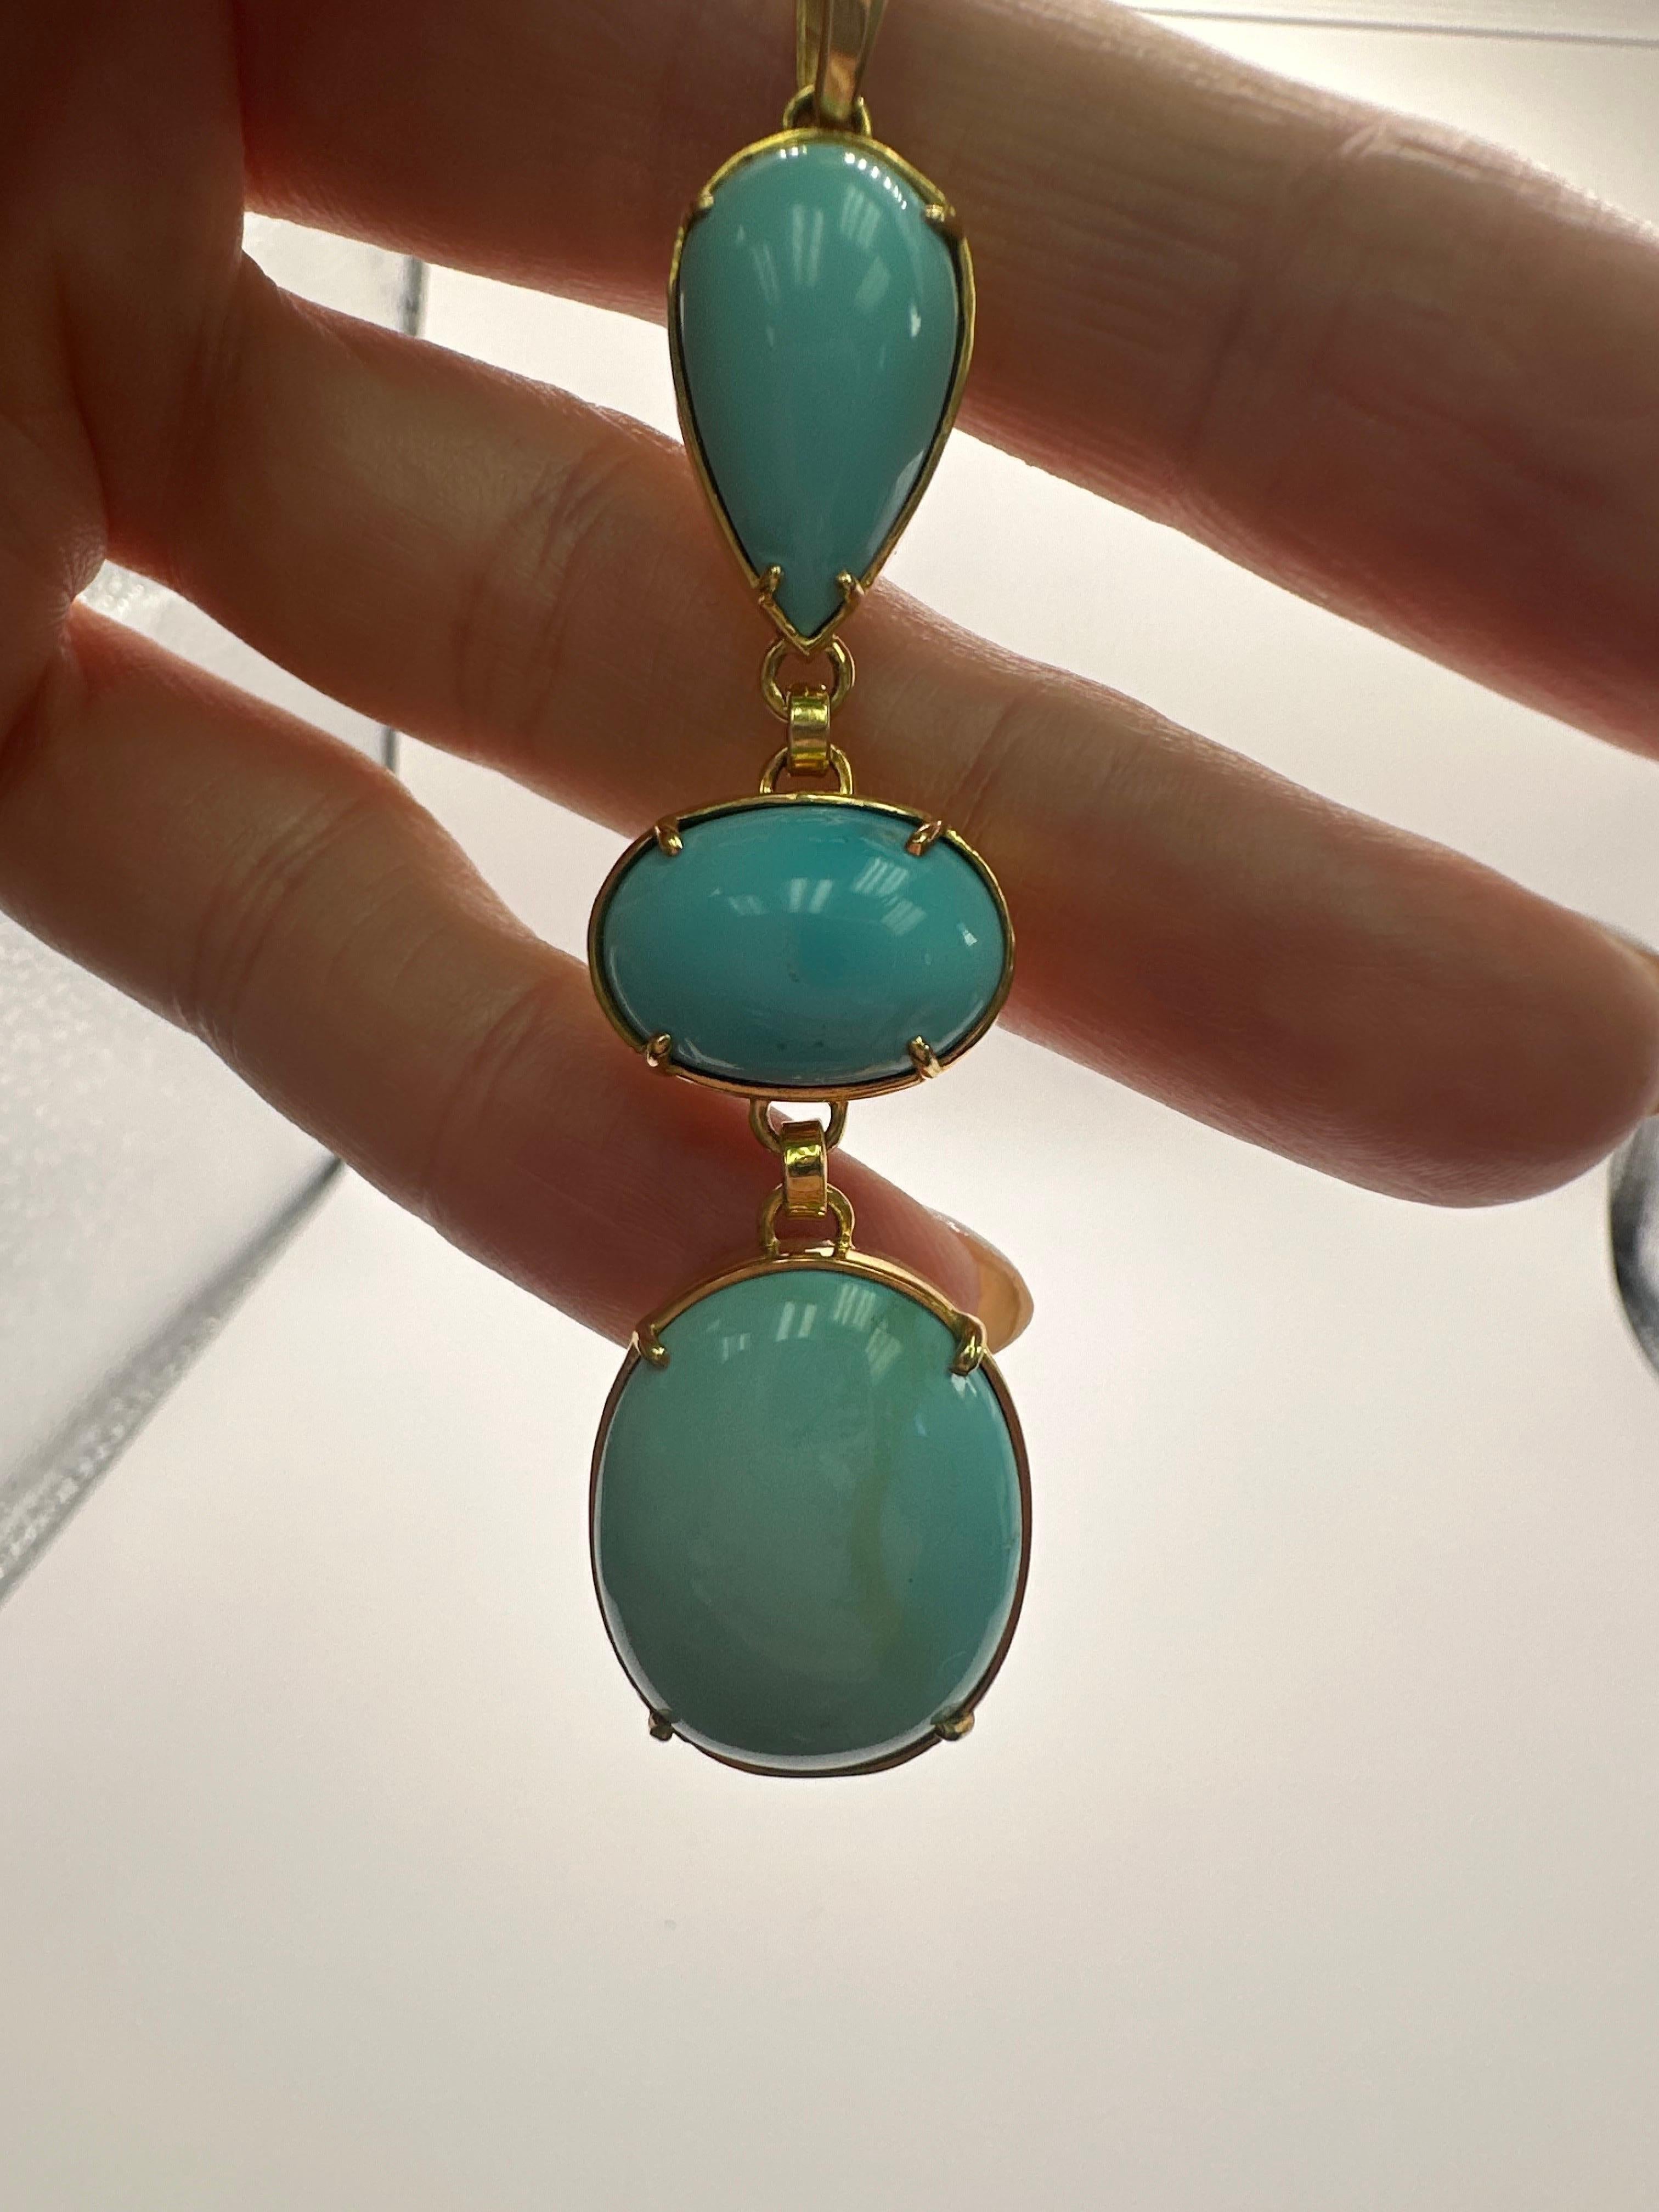 Rare Persian Turquoise pendant with 35 carats of natural turquoise in 18KT solid yellow gold, will come with 18